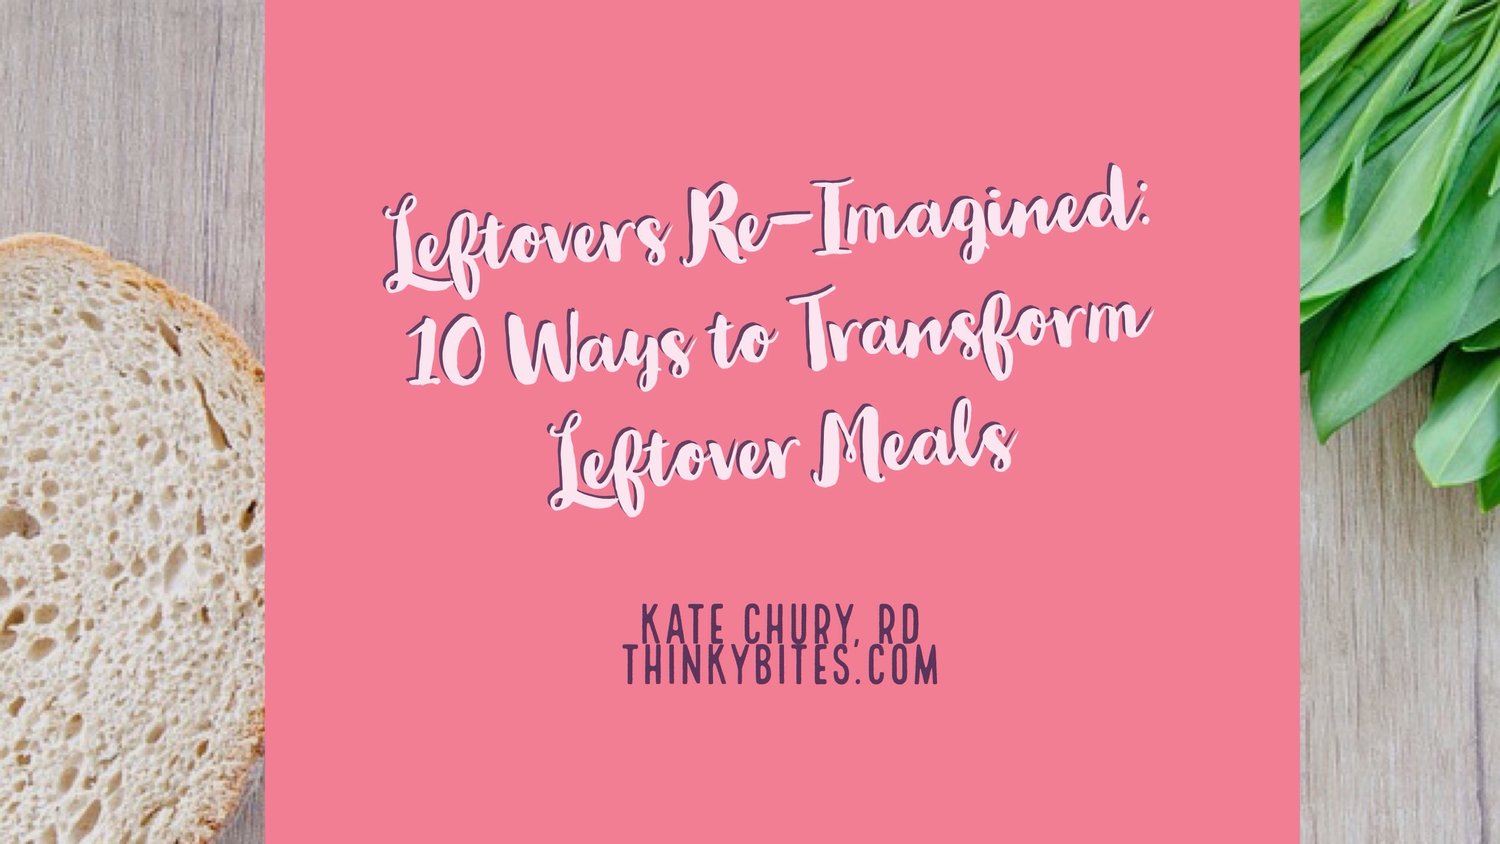 Leftovers Re-Imagined: 10 Ways to Transform Leftover Meals